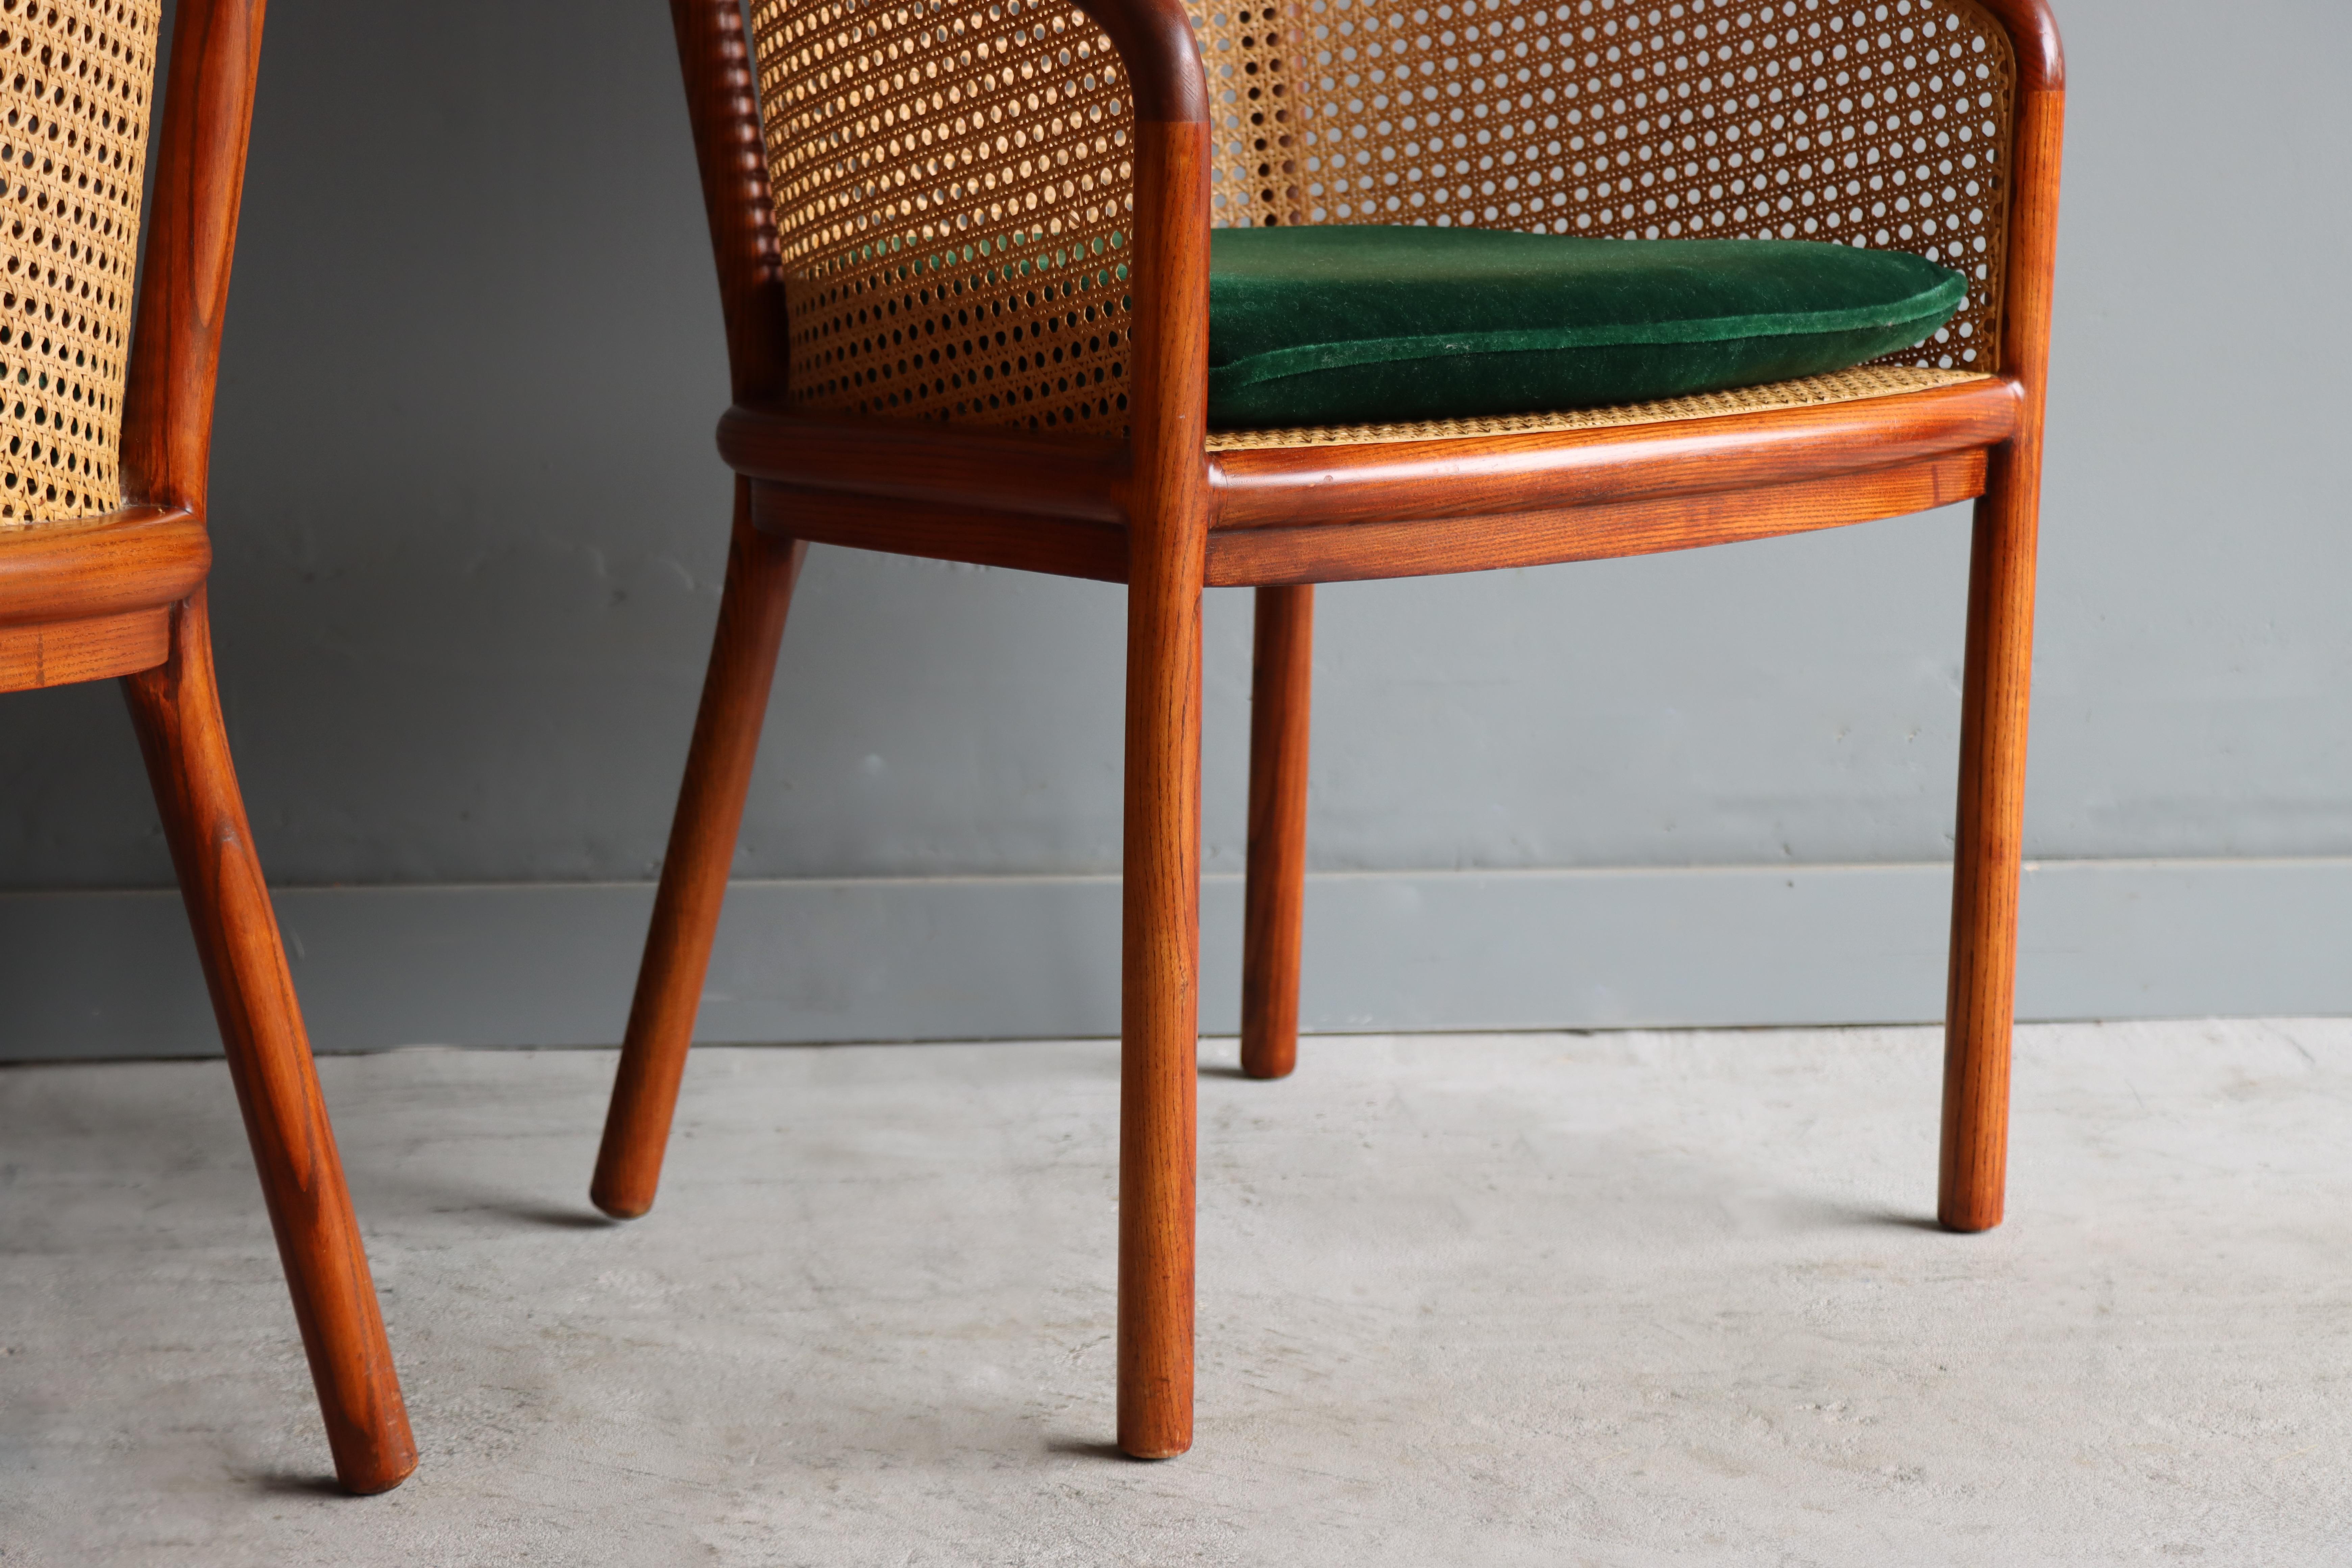 Vintage Pair of ‘Landmark’ Cane Chairs by Ward Bennett for Brickel, 1970, Mohair For Sale 8